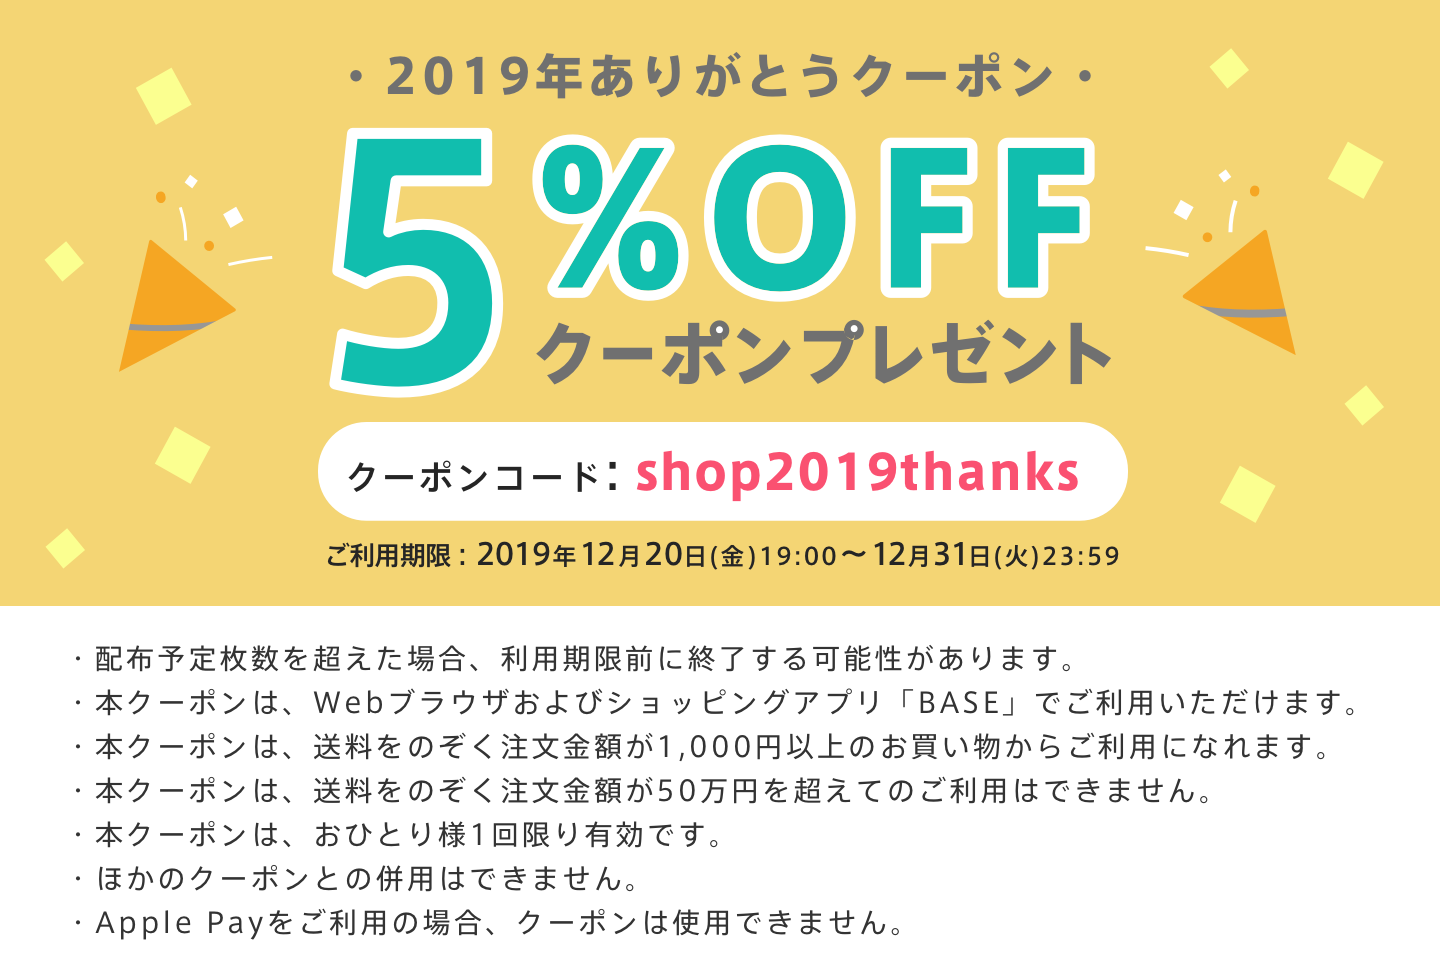 🎁5%OFFクーポンプレゼント🎁